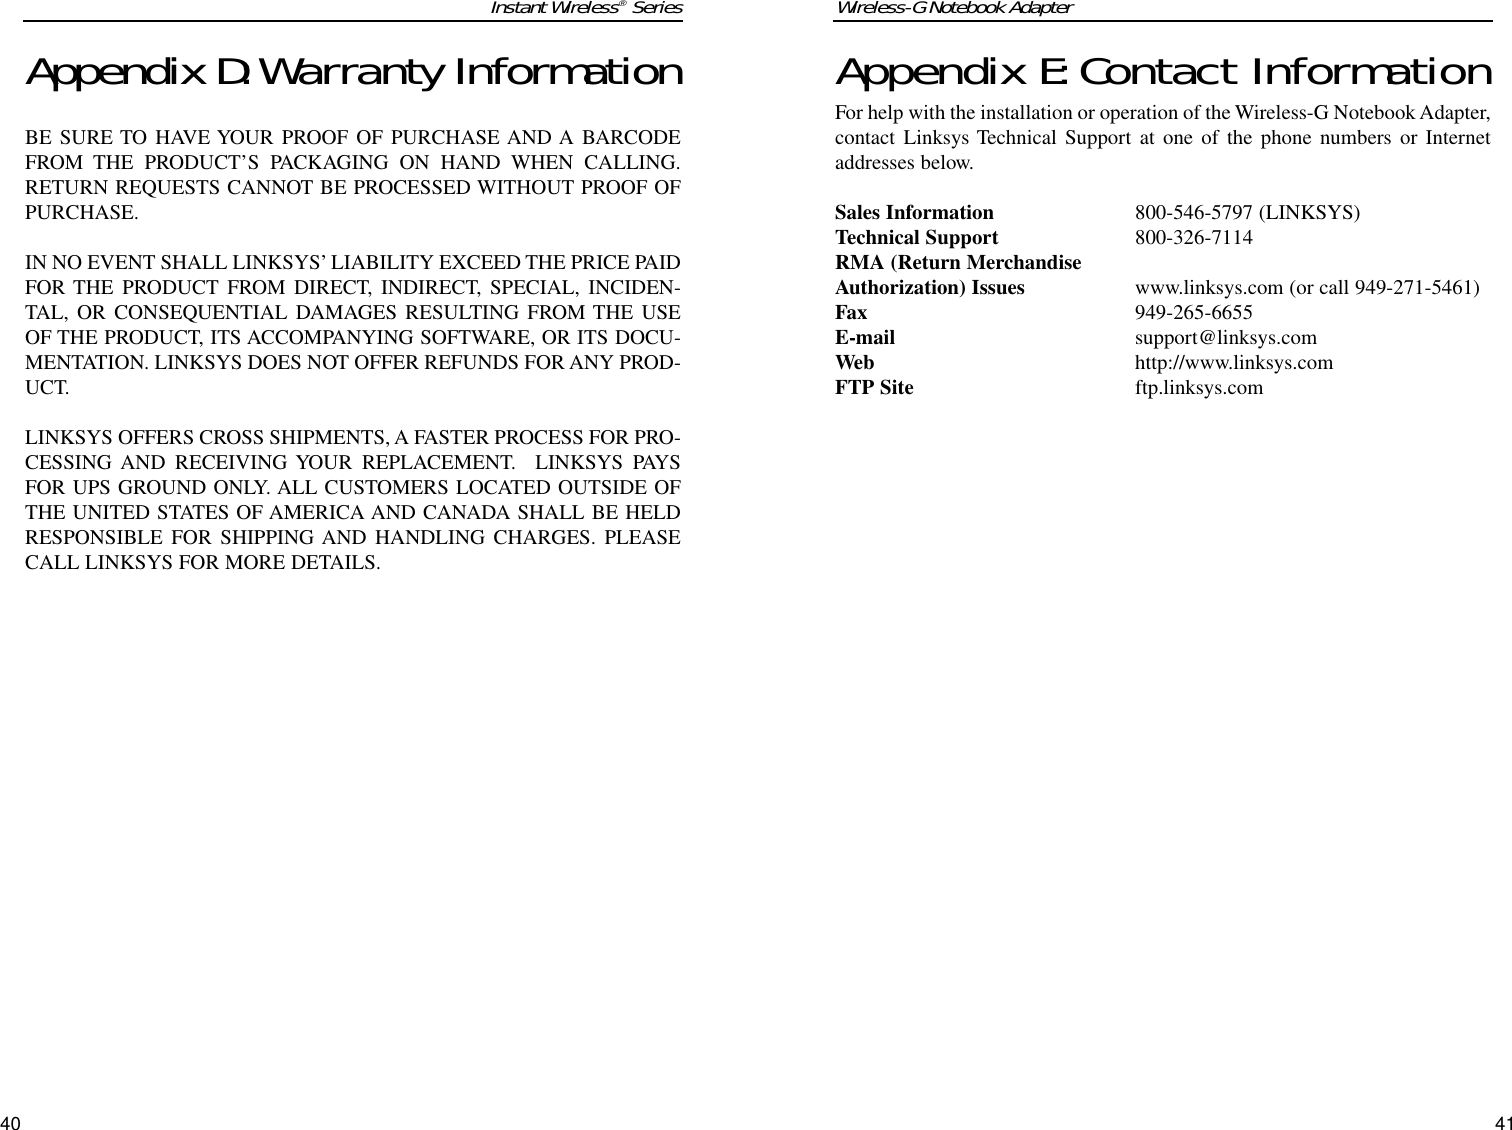 Appendix E:Contact InformationFor help with the installation or operation of the Wireless-G Notebook Adapter,contact Linksys Technical Support at one of the phone numbers or Internetaddresses below.Sales Information 800-546-5797 (LINKSYS)Technical Support 800-326-7114RMA (Return MerchandiseAuthorization) Issues www.linksys.com (or call 949-271-5461)Fax 949-265-6655E-mail support@linksys.comWeb http://www.linksys.comFTP Site ftp.linksys.comAppendix D:Warranty InformationBE SURE TO HAVE YOUR PROOF OF PURCHASE AND A BARCODEFROM THE PRODUCT’S PACKAGING ON HAND WHEN CALLING.RETURN REQUESTS CANNOT BE PROCESSED WITHOUT PROOF OFPURCHASE. IN NO EVENT SHALL LINKSYS’ LIABILITY EXCEED THE PRICE PAIDFOR THE PRODUCT FROM DIRECT, INDIRECT, SPECIAL, INCIDEN-TAL, OR CONSEQUENTIAL DAMAGES RESULTING FROM THE USEOF THE PRODUCT, ITS ACCOMPANYING SOFTWARE, OR ITS DOCU-MENTATION. LINKSYS DOES NOT OFFER REFUNDS FOR ANY PROD-UCT. LINKSYS OFFERS CROSS SHIPMENTS, A FASTER PROCESS FOR PRO-CESSING AND RECEIVING YOUR REPLACEMENT.  LINKSYS PAYSFOR UPS GROUND ONLY. ALL CUSTOMERS LOCATED OUTSIDE OFTHE UNITED STATES OF AMERICA AND CANADA SHALL BE HELDRESPONSIBLE FOR SHIPPING AND HANDLING CHARGES. PLEASECALL LINKSYS FOR MORE DETAILS.Wireless-G Notebook Adapter41Instant Wireless®Series40